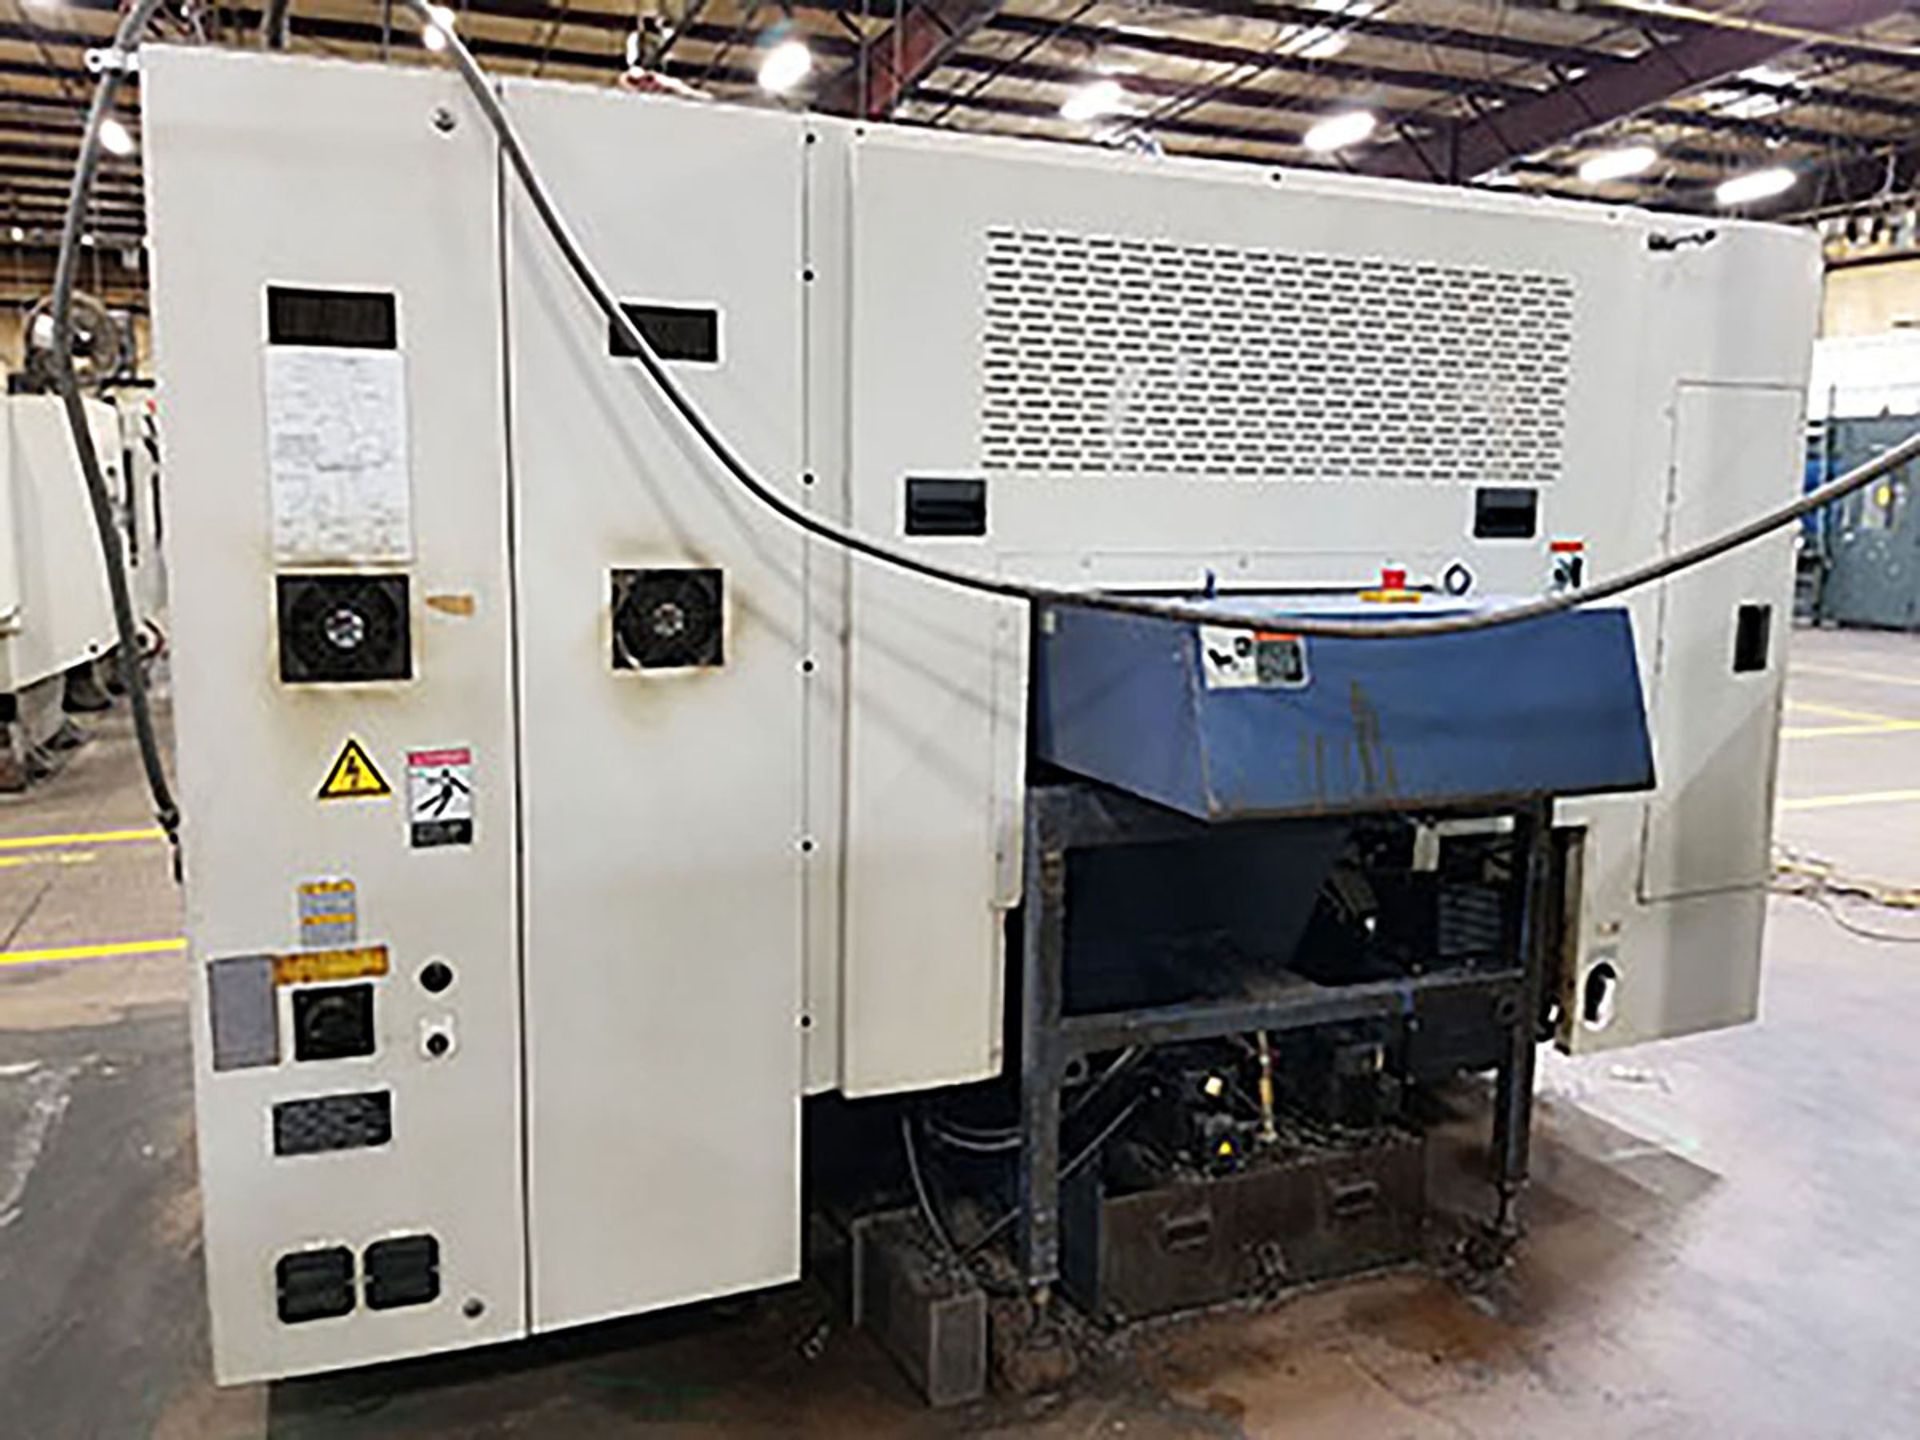 2000 MORI SEKI DL151 4-AXIS CNC TURNING CENTER; DUAL SPINDLE, (2) 12-POSITION TURRET, COOLANT, - Image 4 of 10